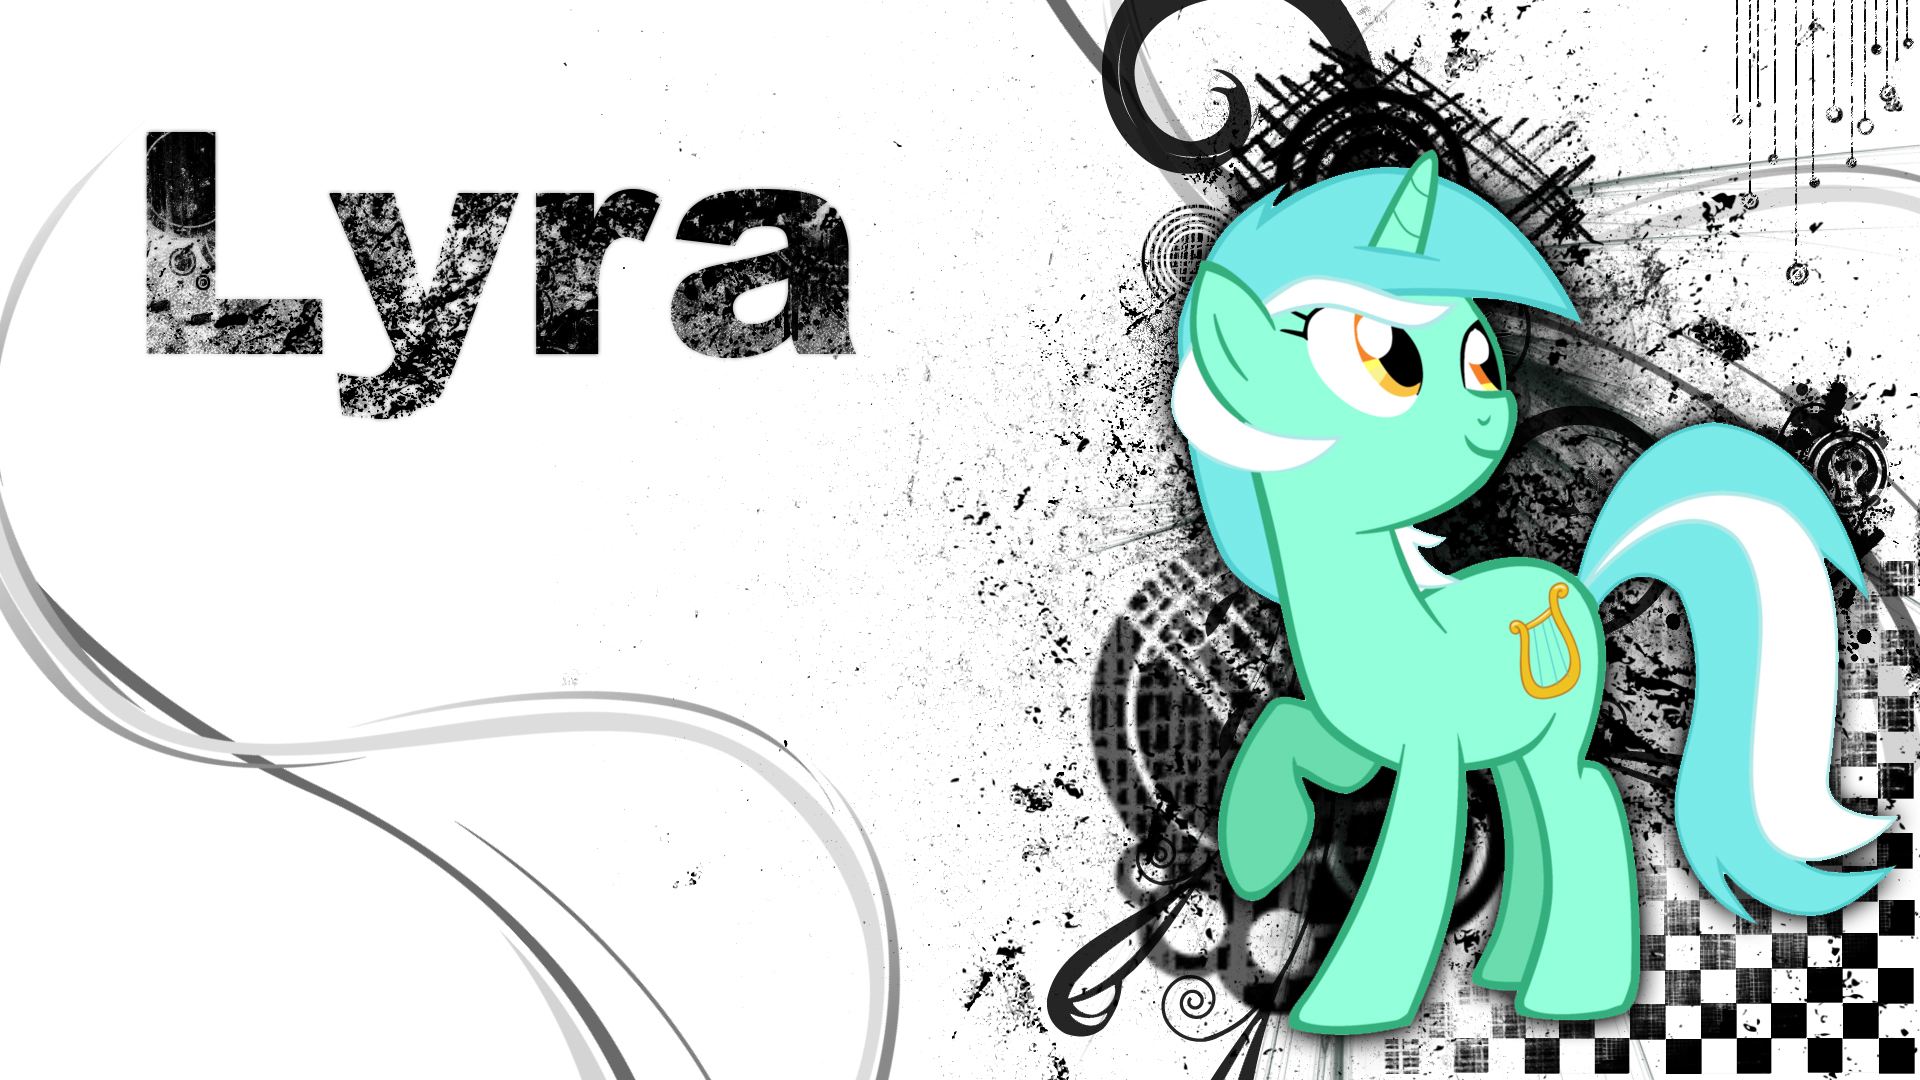 Lyra Grunge Wallpaper by TheSlickOctopus